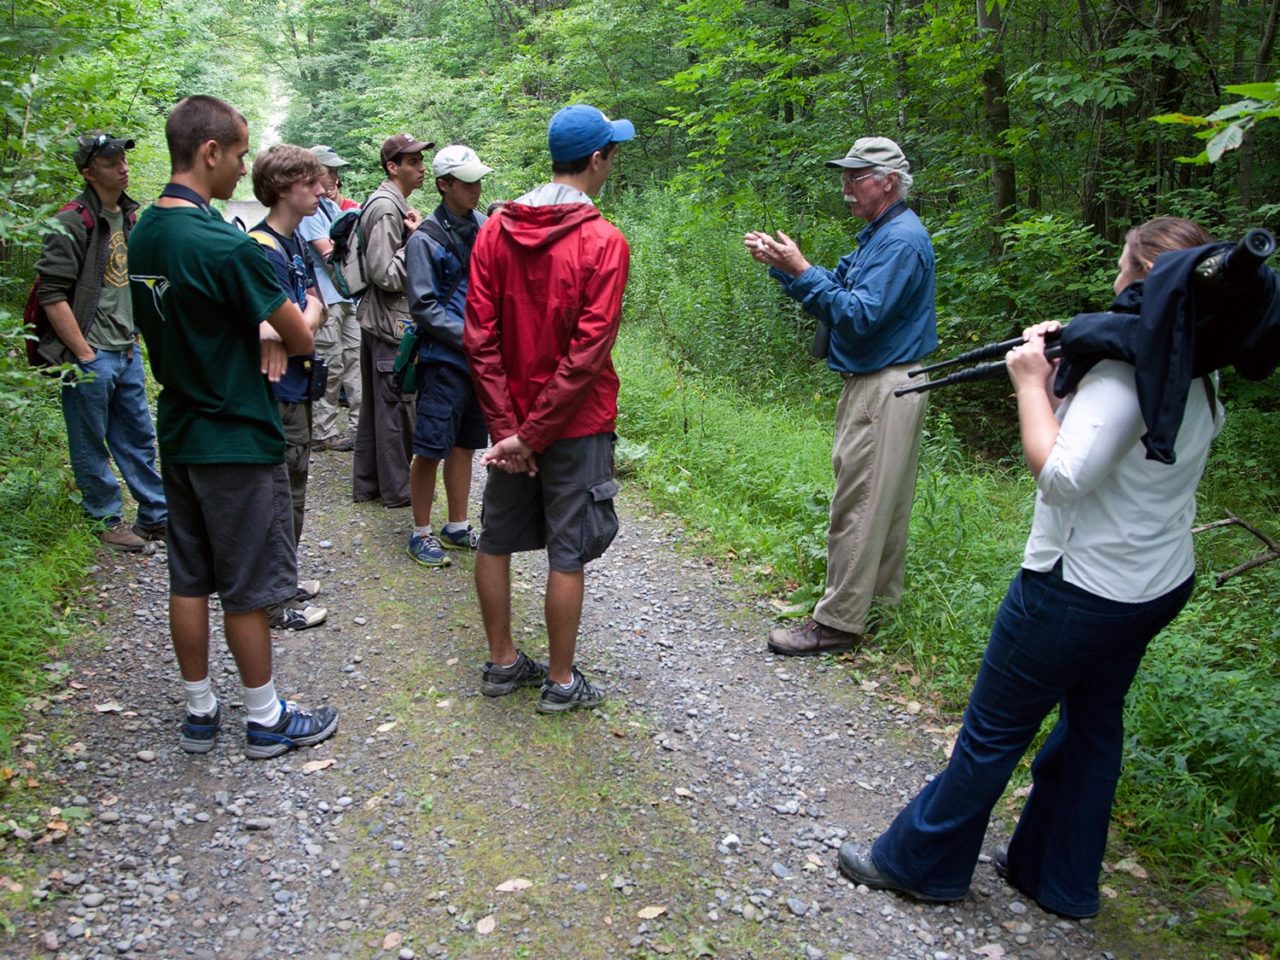 John Fitzpatrick speaks to a group of young birdwatchers on a forested road